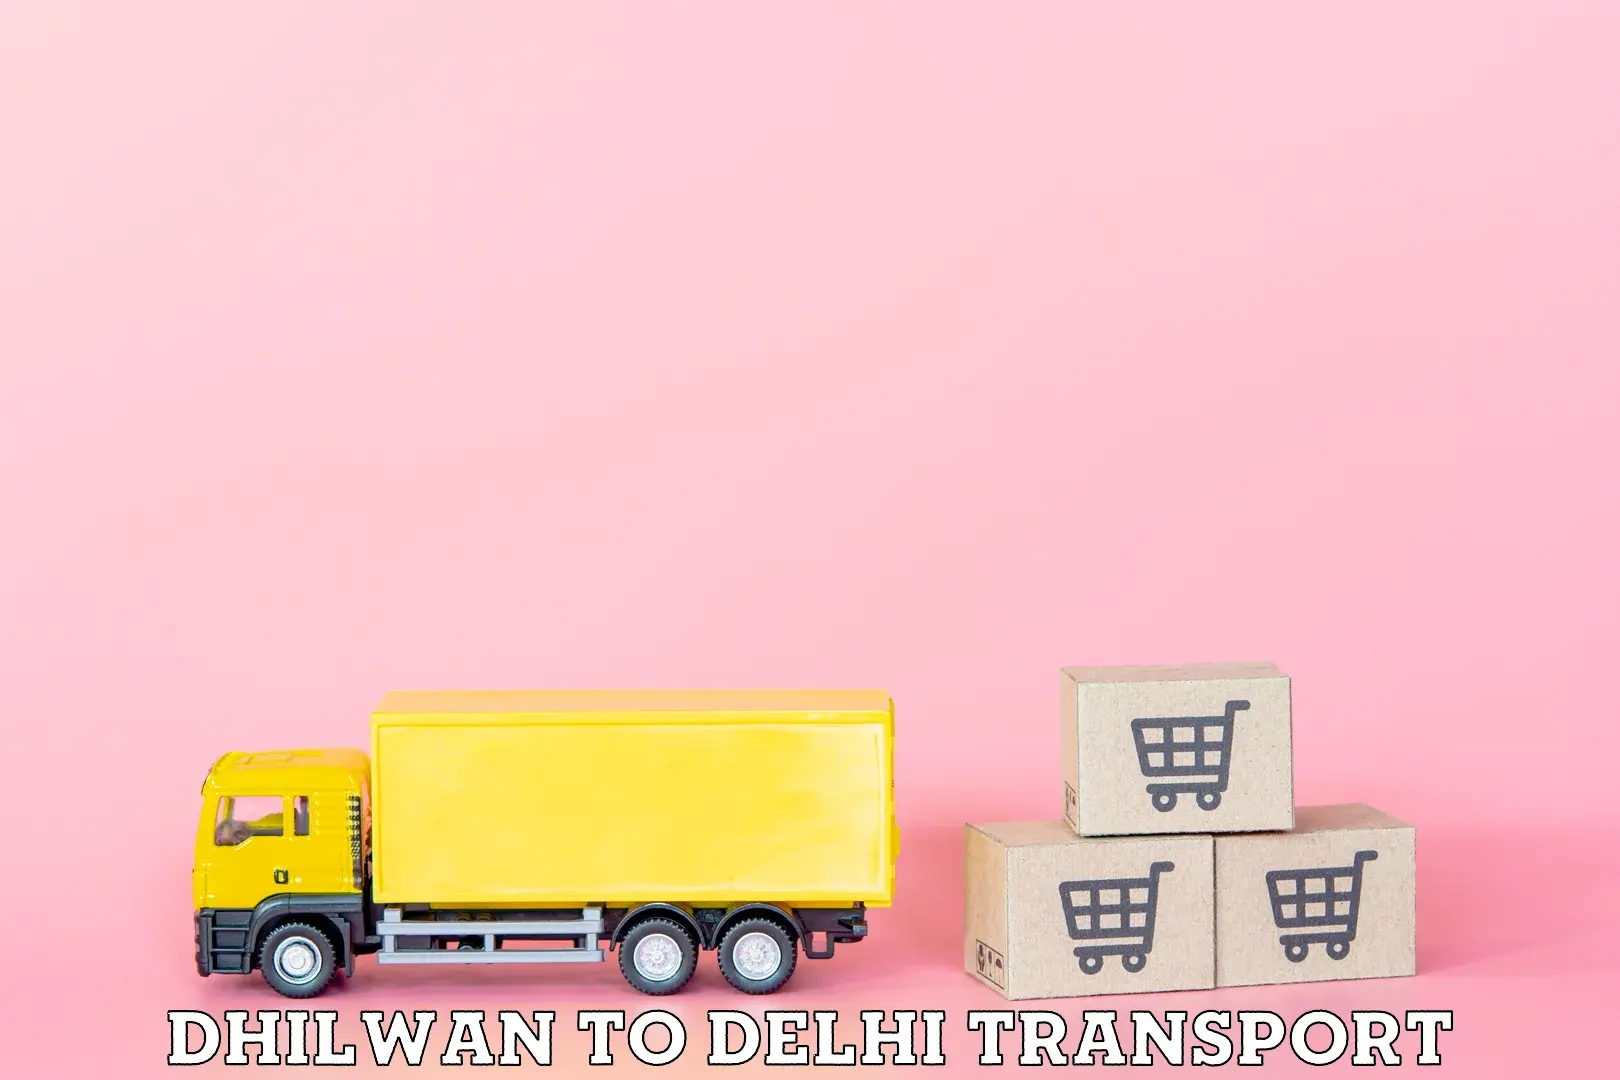 Express transport services Dhilwan to Delhi